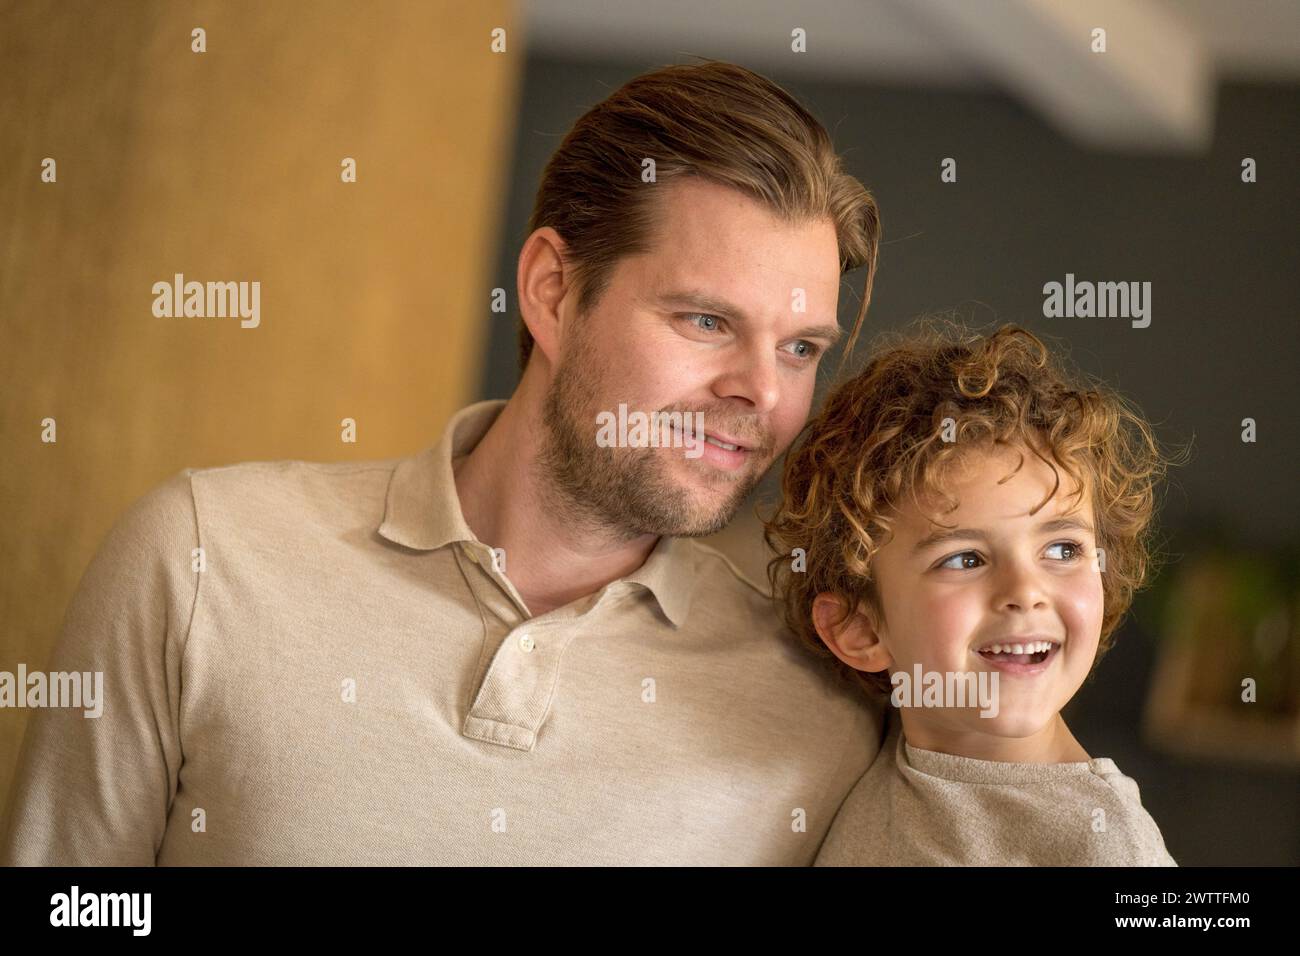 Father and son sharing a joyful moment together. Stock Photo